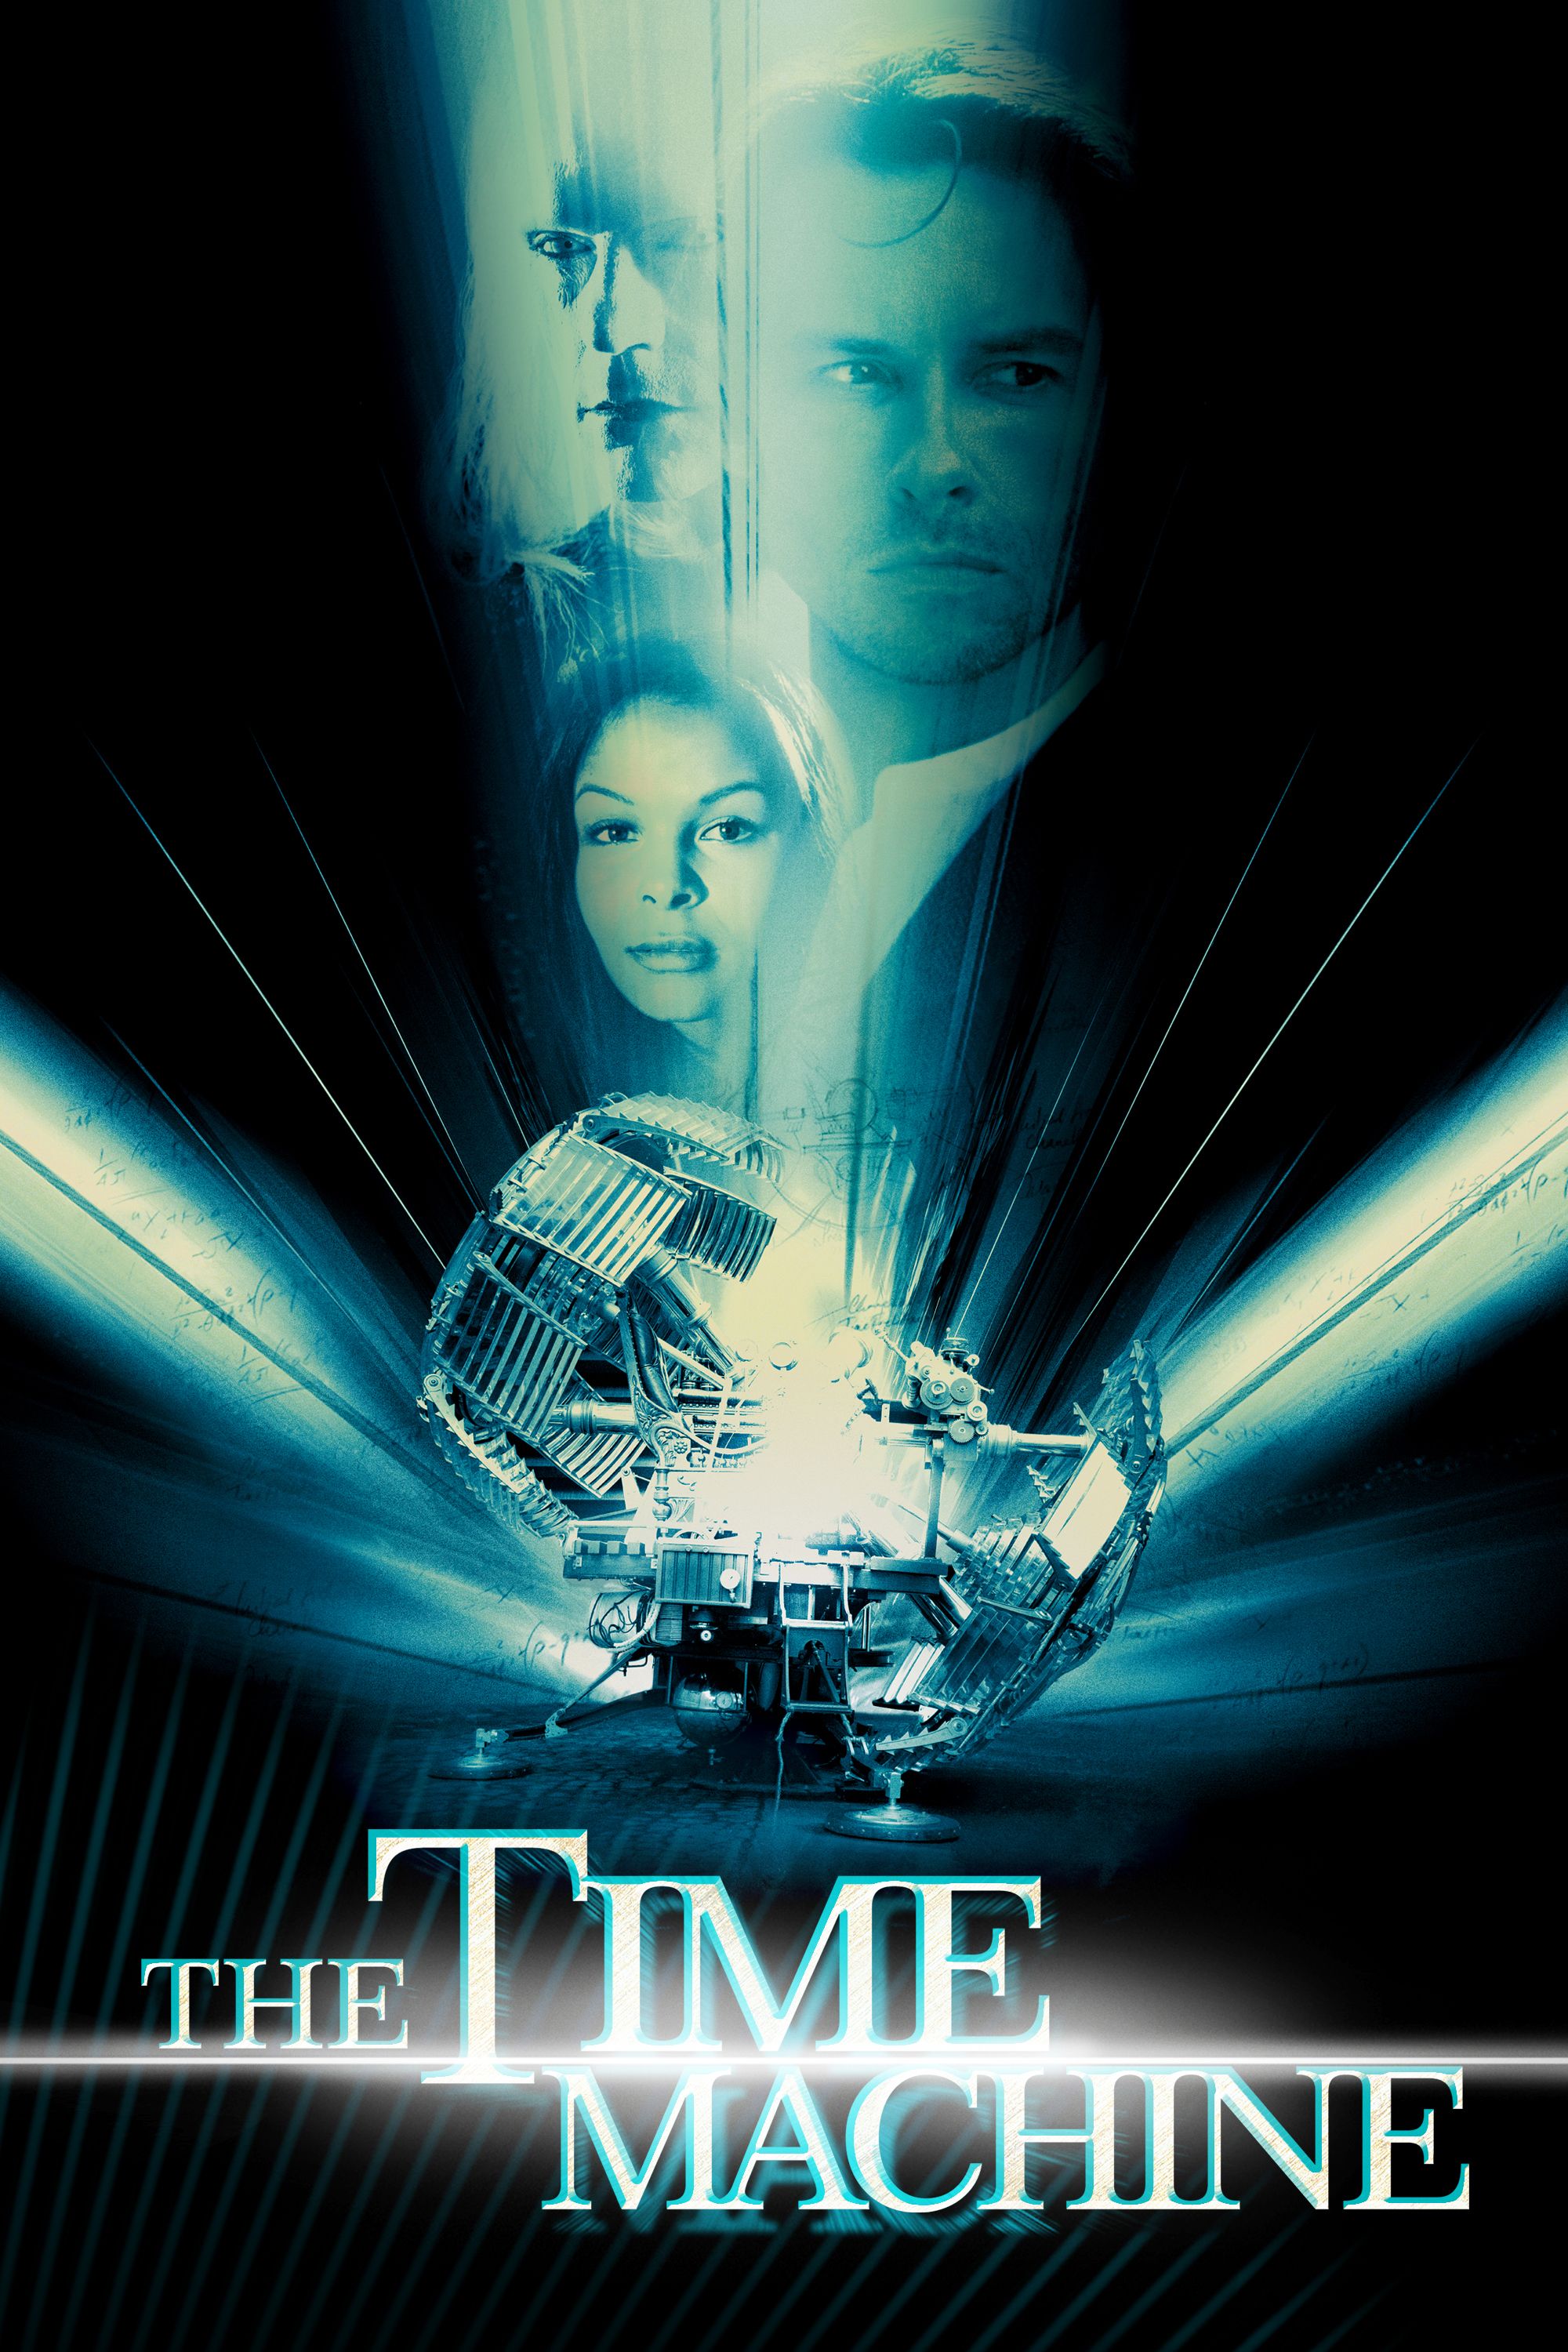 The Time Machine 2002 Full Movie Online In Hd Quality